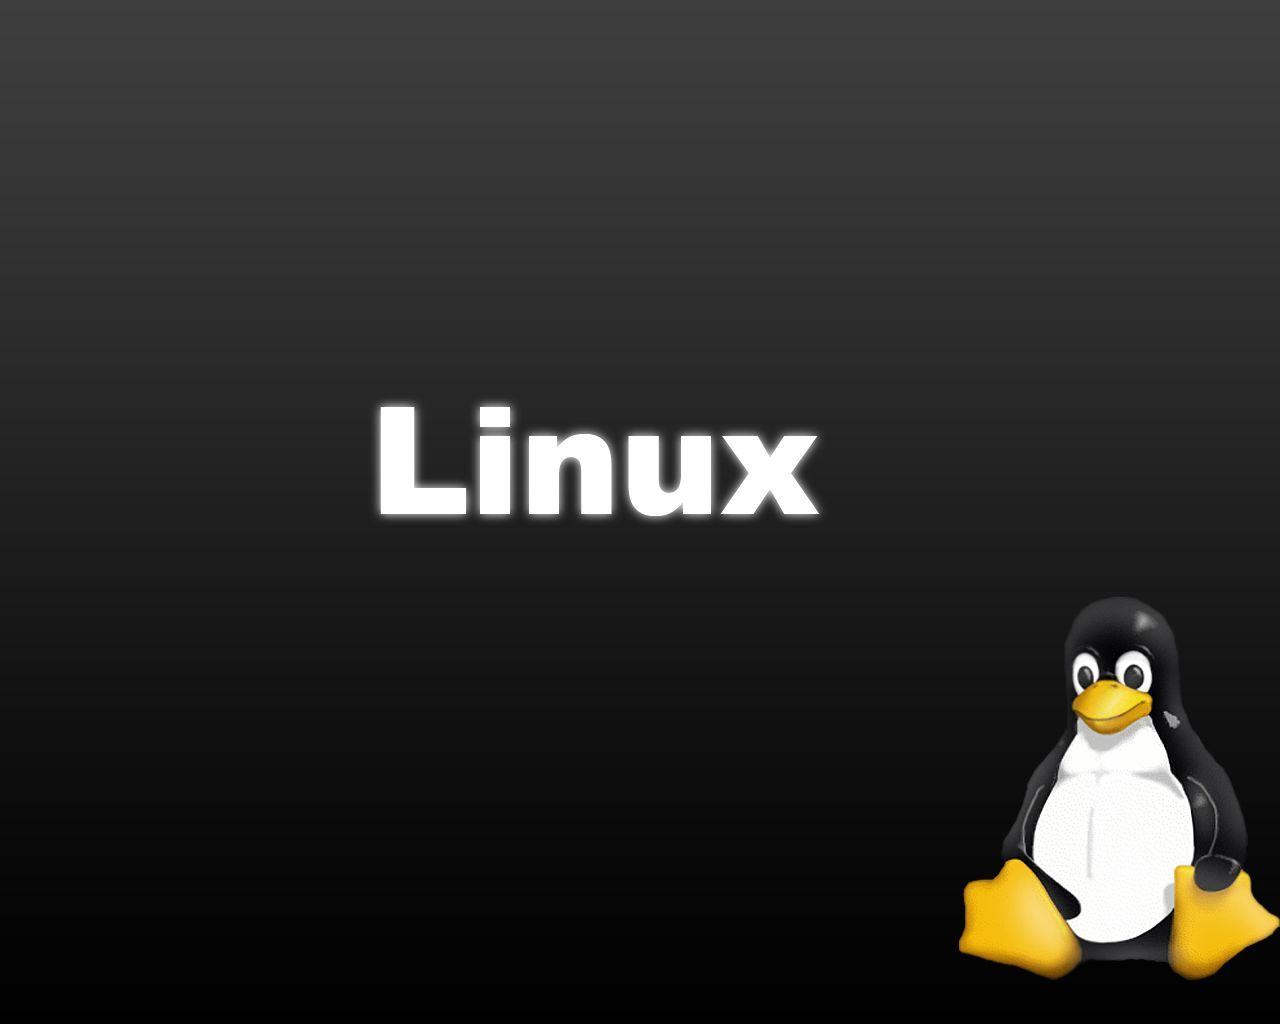 Linux Black Penguin Background Wallpaper and Picture. Imageize